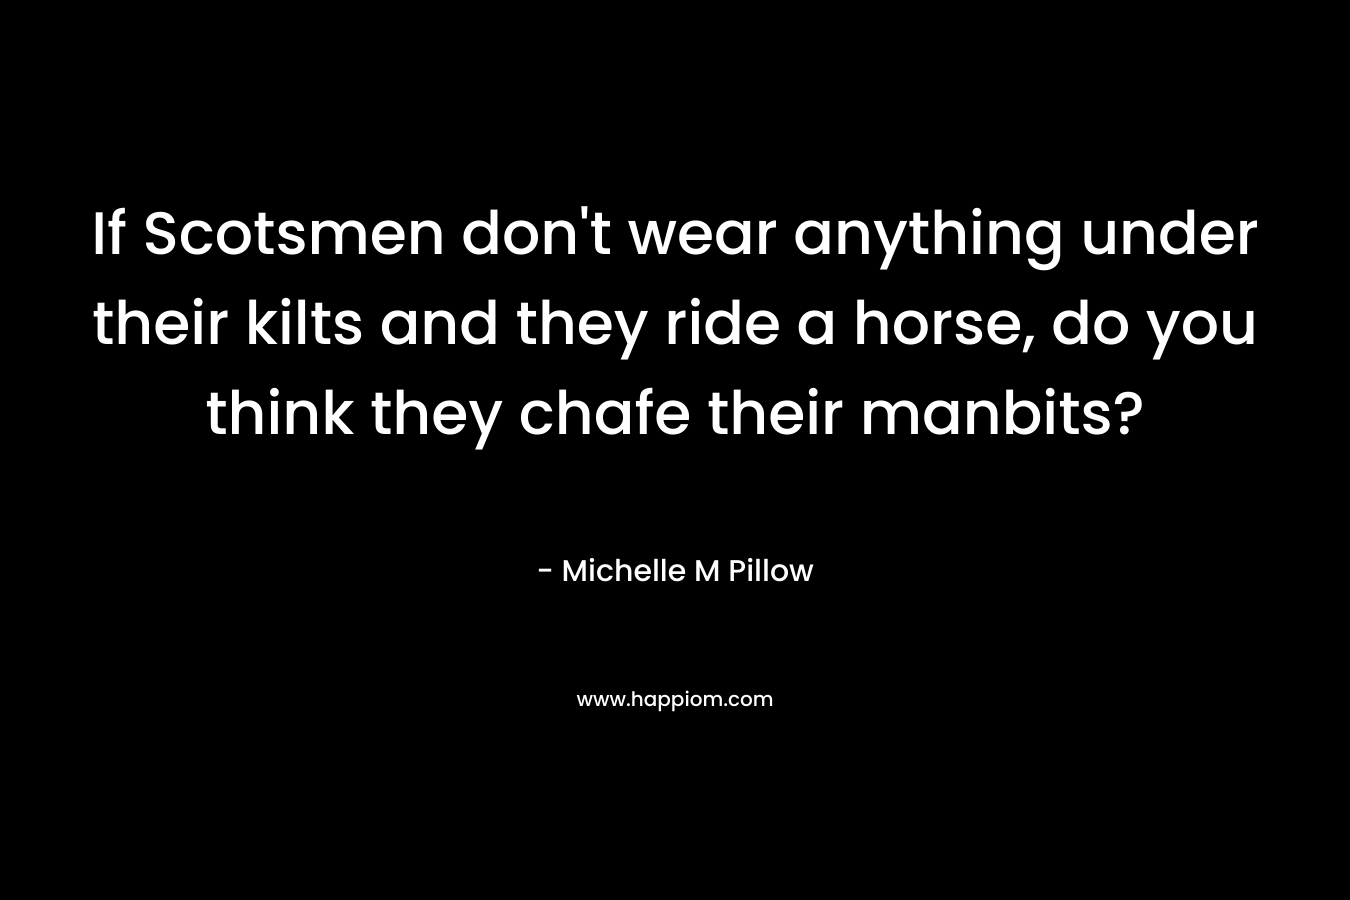 If Scotsmen don’t wear anything under their kilts and they ride a horse, do you think they chafe their manbits? – Michelle M Pillow